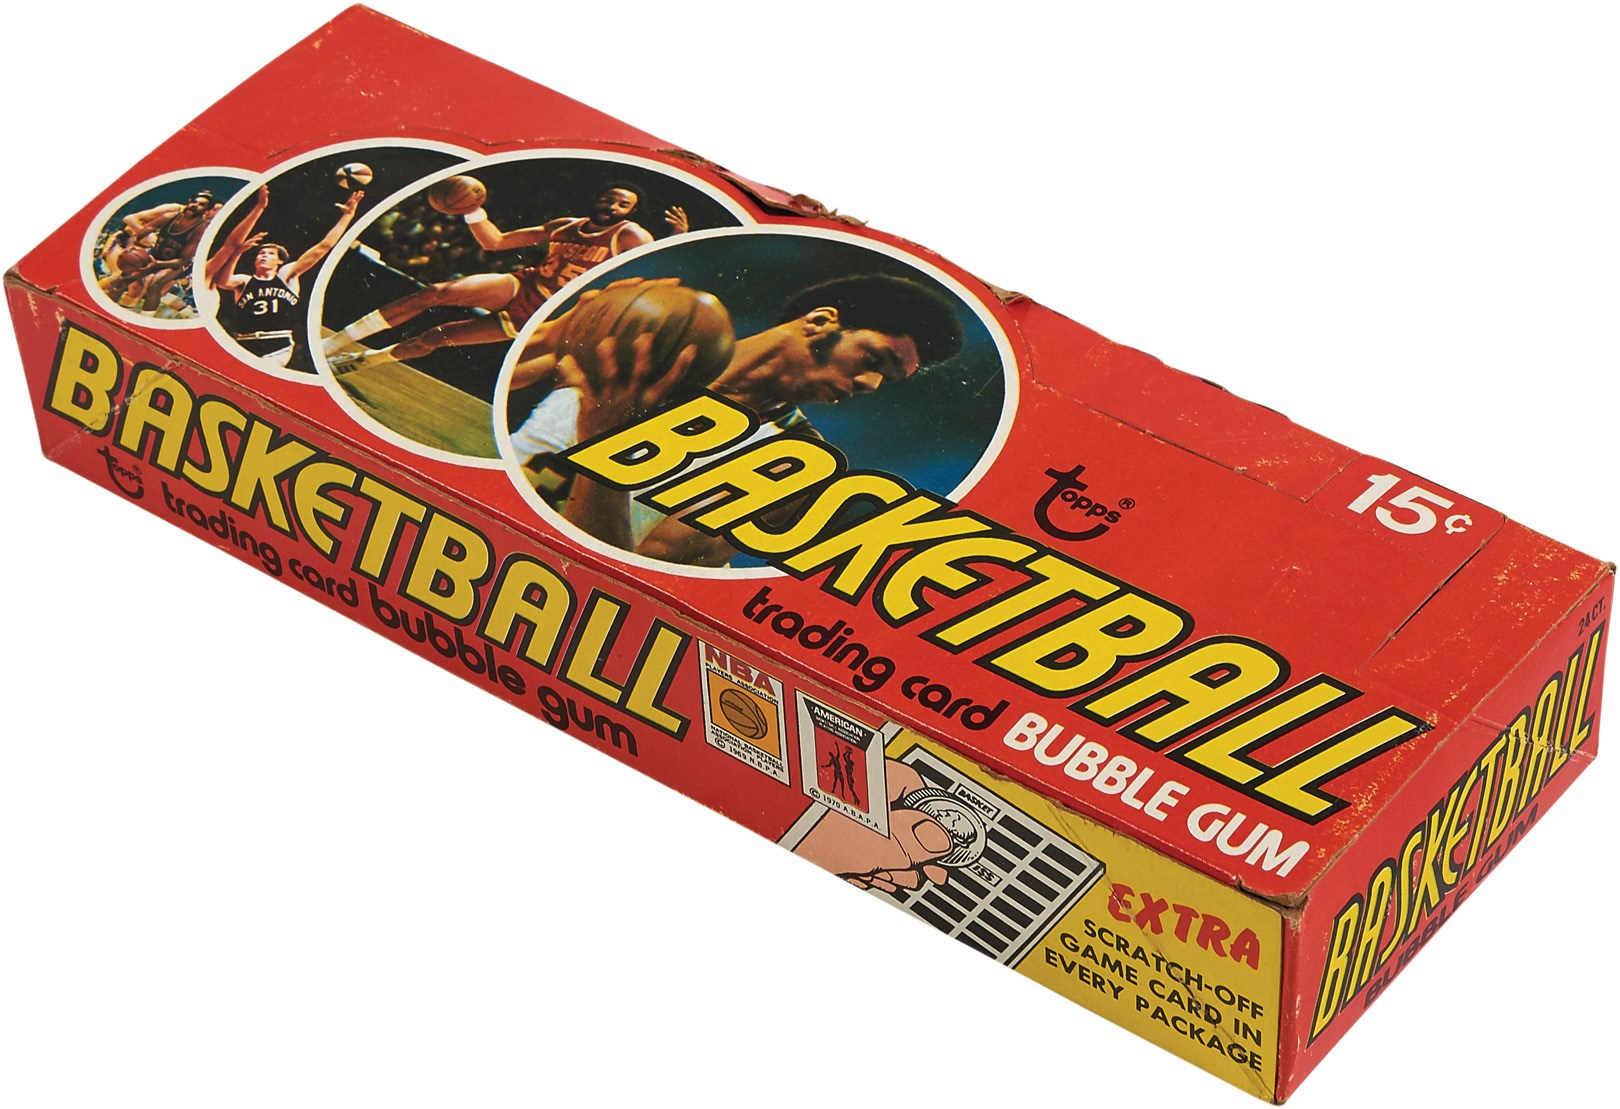 - 1974 Topps Basketball Near Complete Wax Box with 22 Unopened Packs